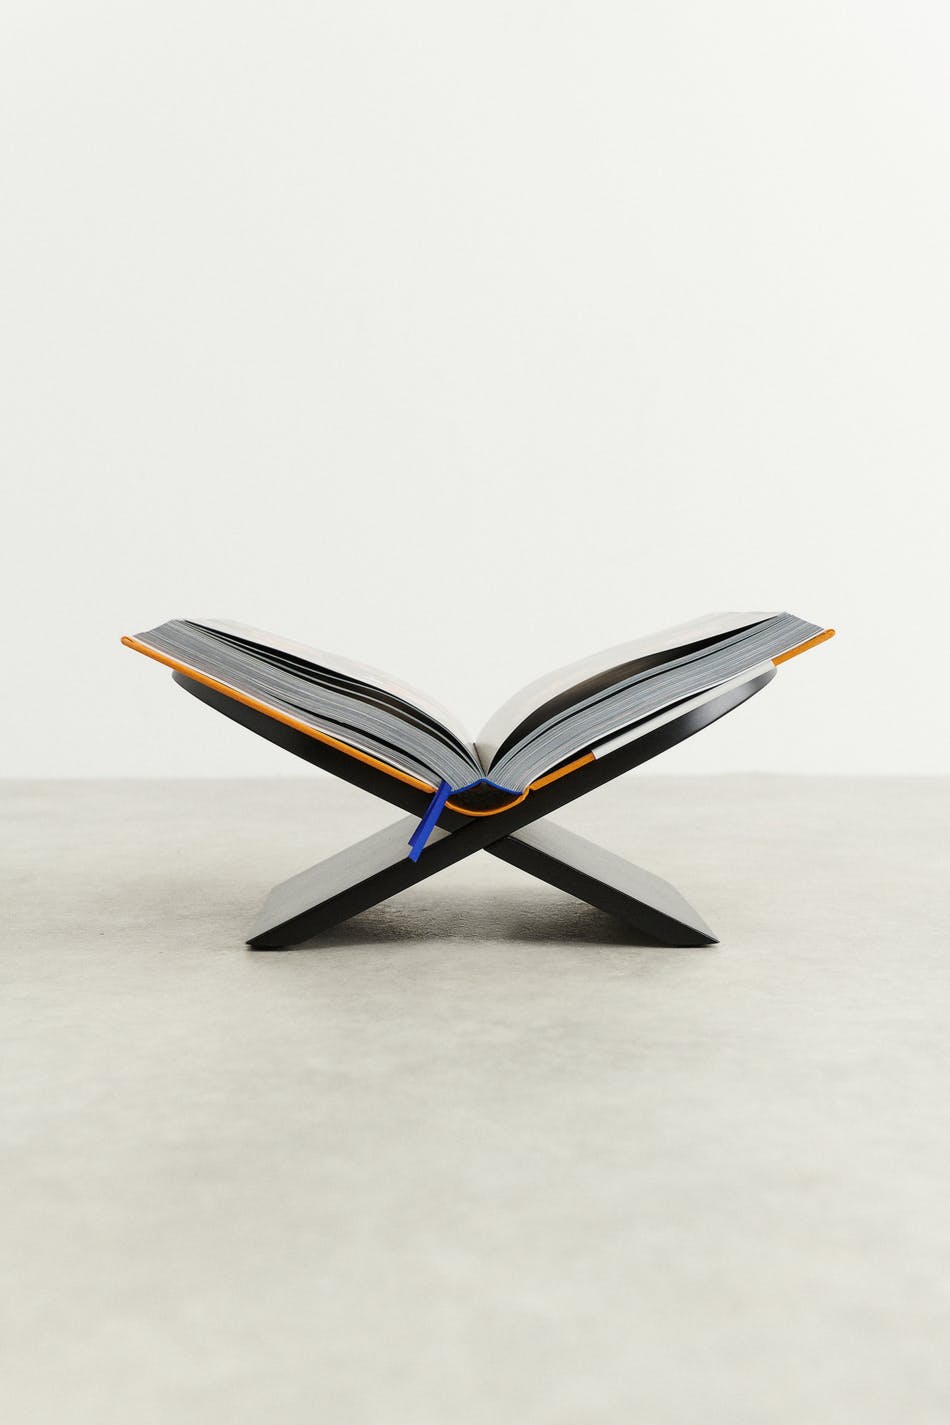 Book stand